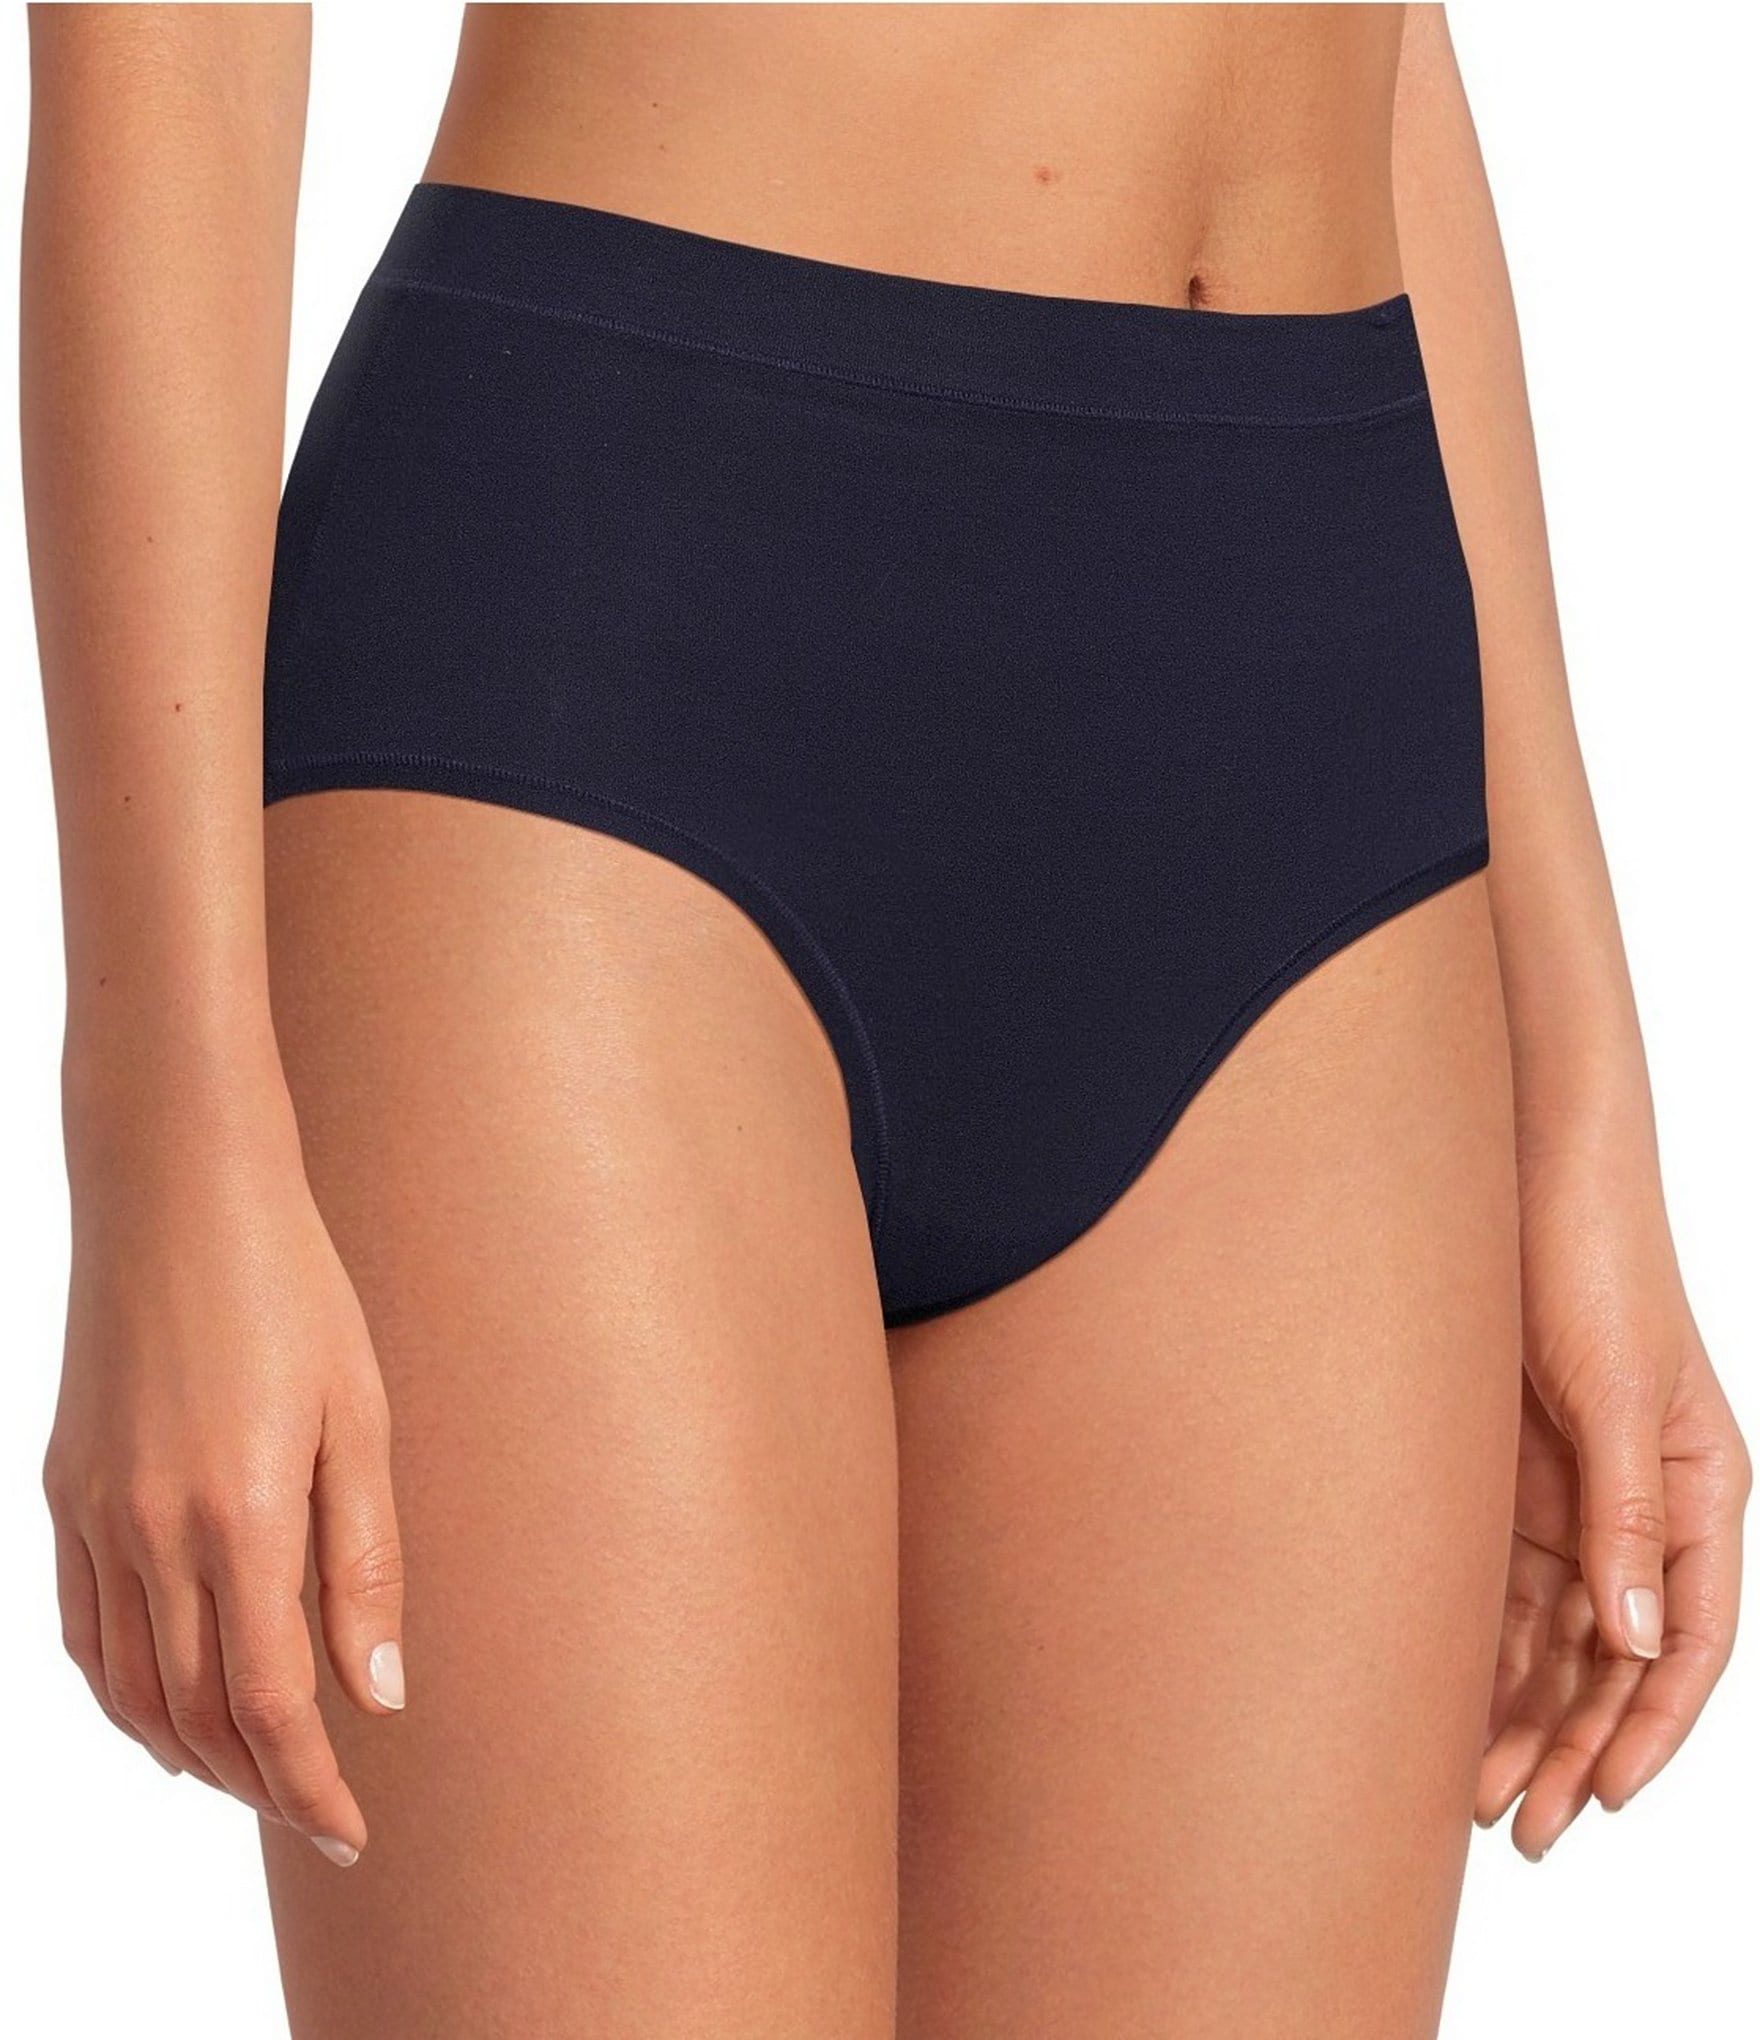 Adidas Smart Cotton Mid Rise Hipster Panty